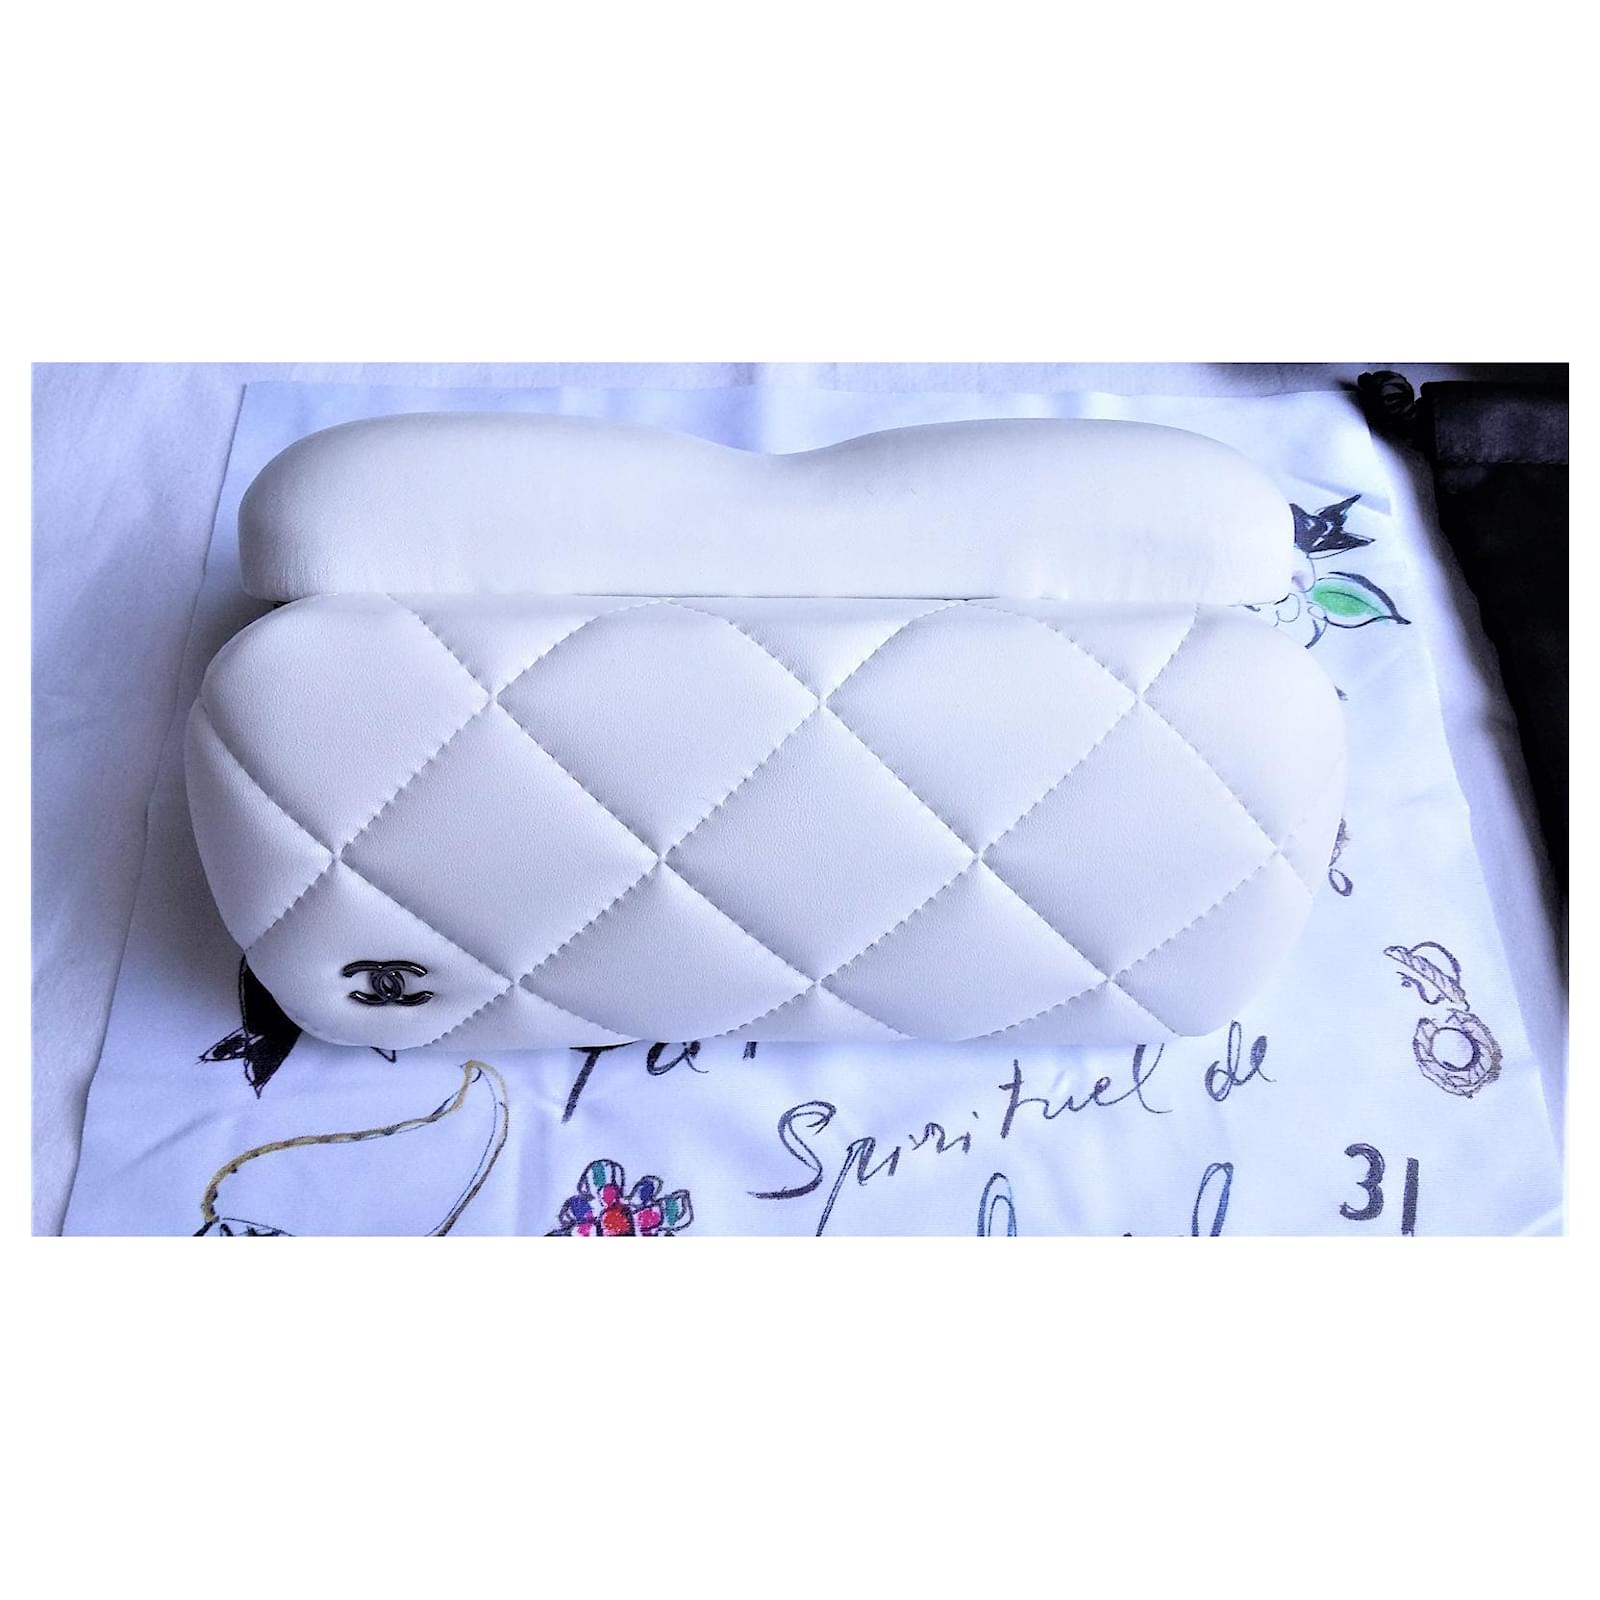 NEUF - White CHANEL glasses case (rare) with FREE mask Leatherette